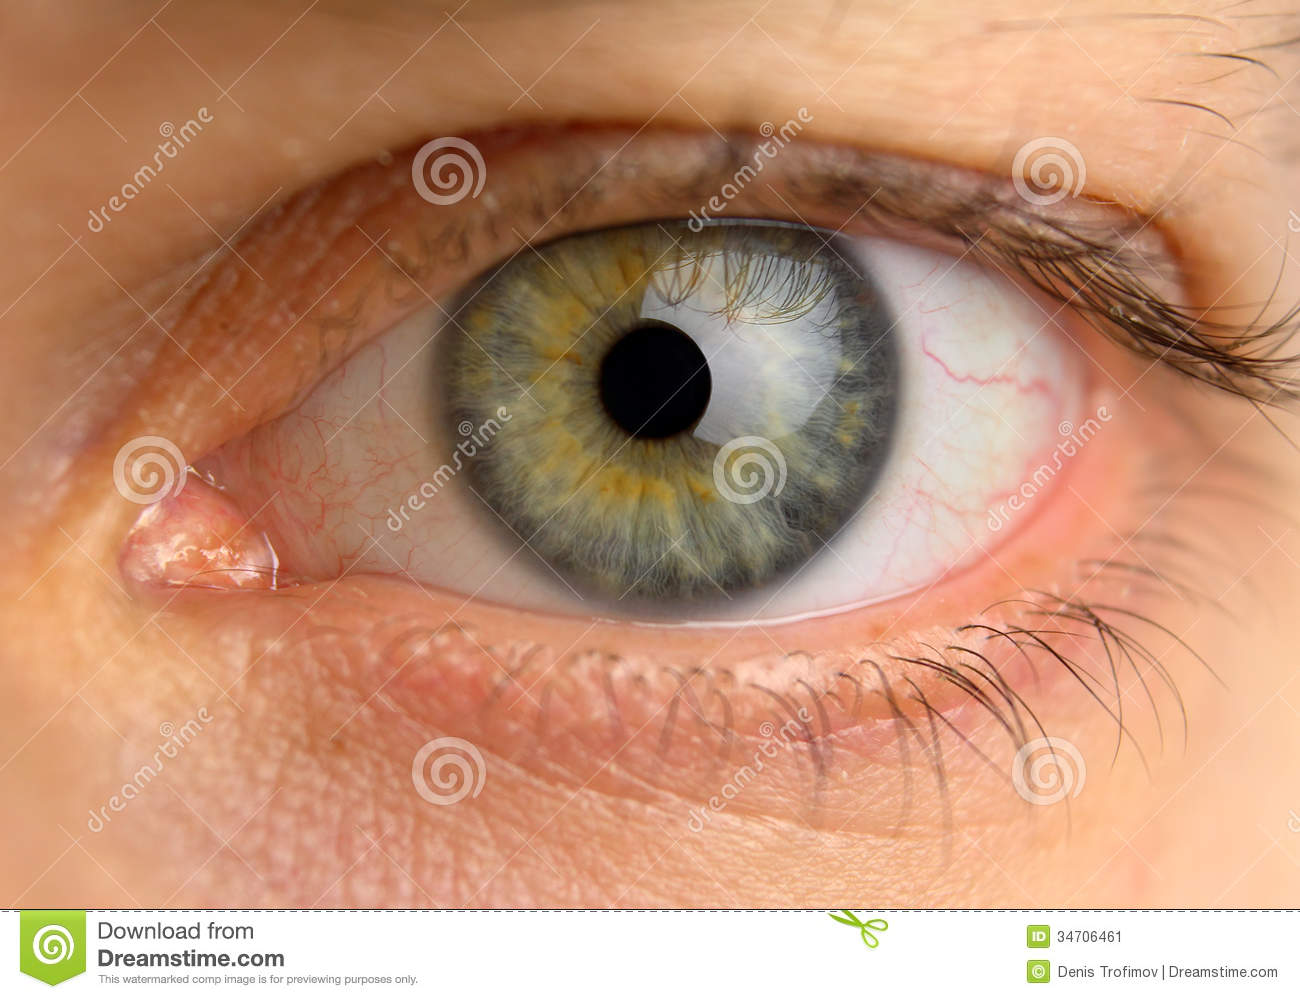 Tired Man Eye With Blood Vessels Stock Image   Image  34706461